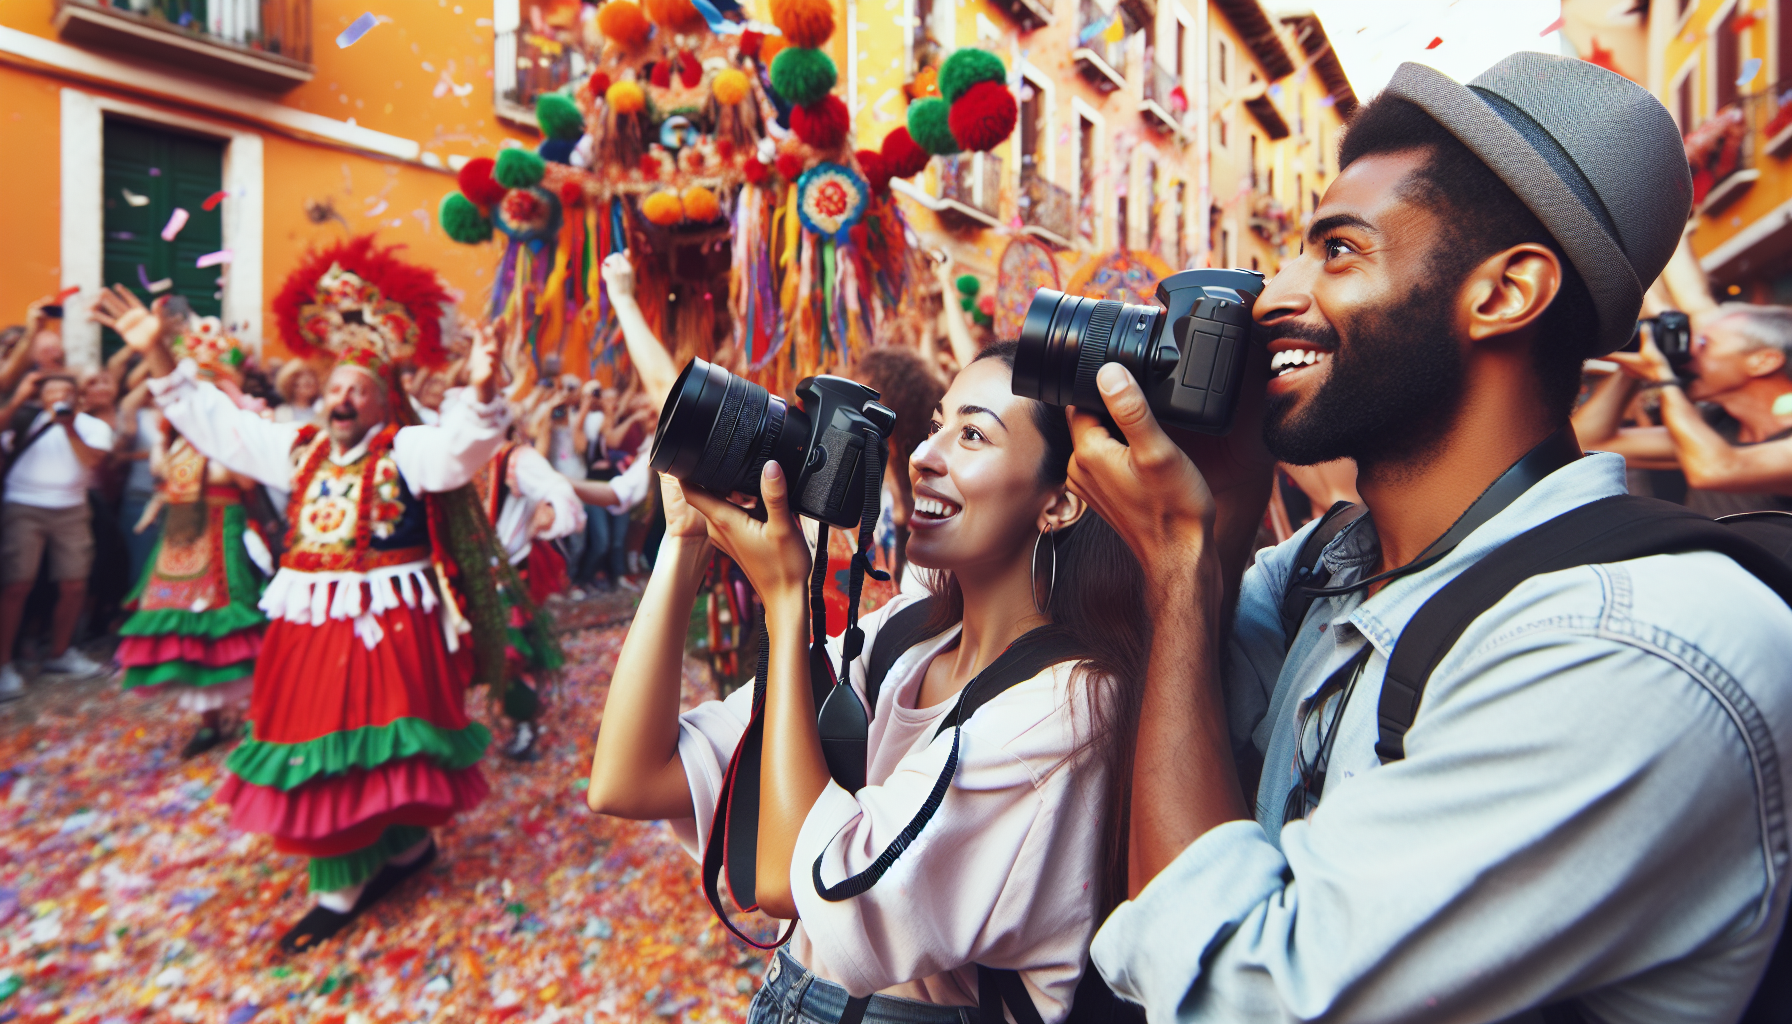 discover the vibrant cultural celebrations waiting to be experienced at european festivals and events. from traditional dances to unique customs, explore the rich tapestry of european heritage.